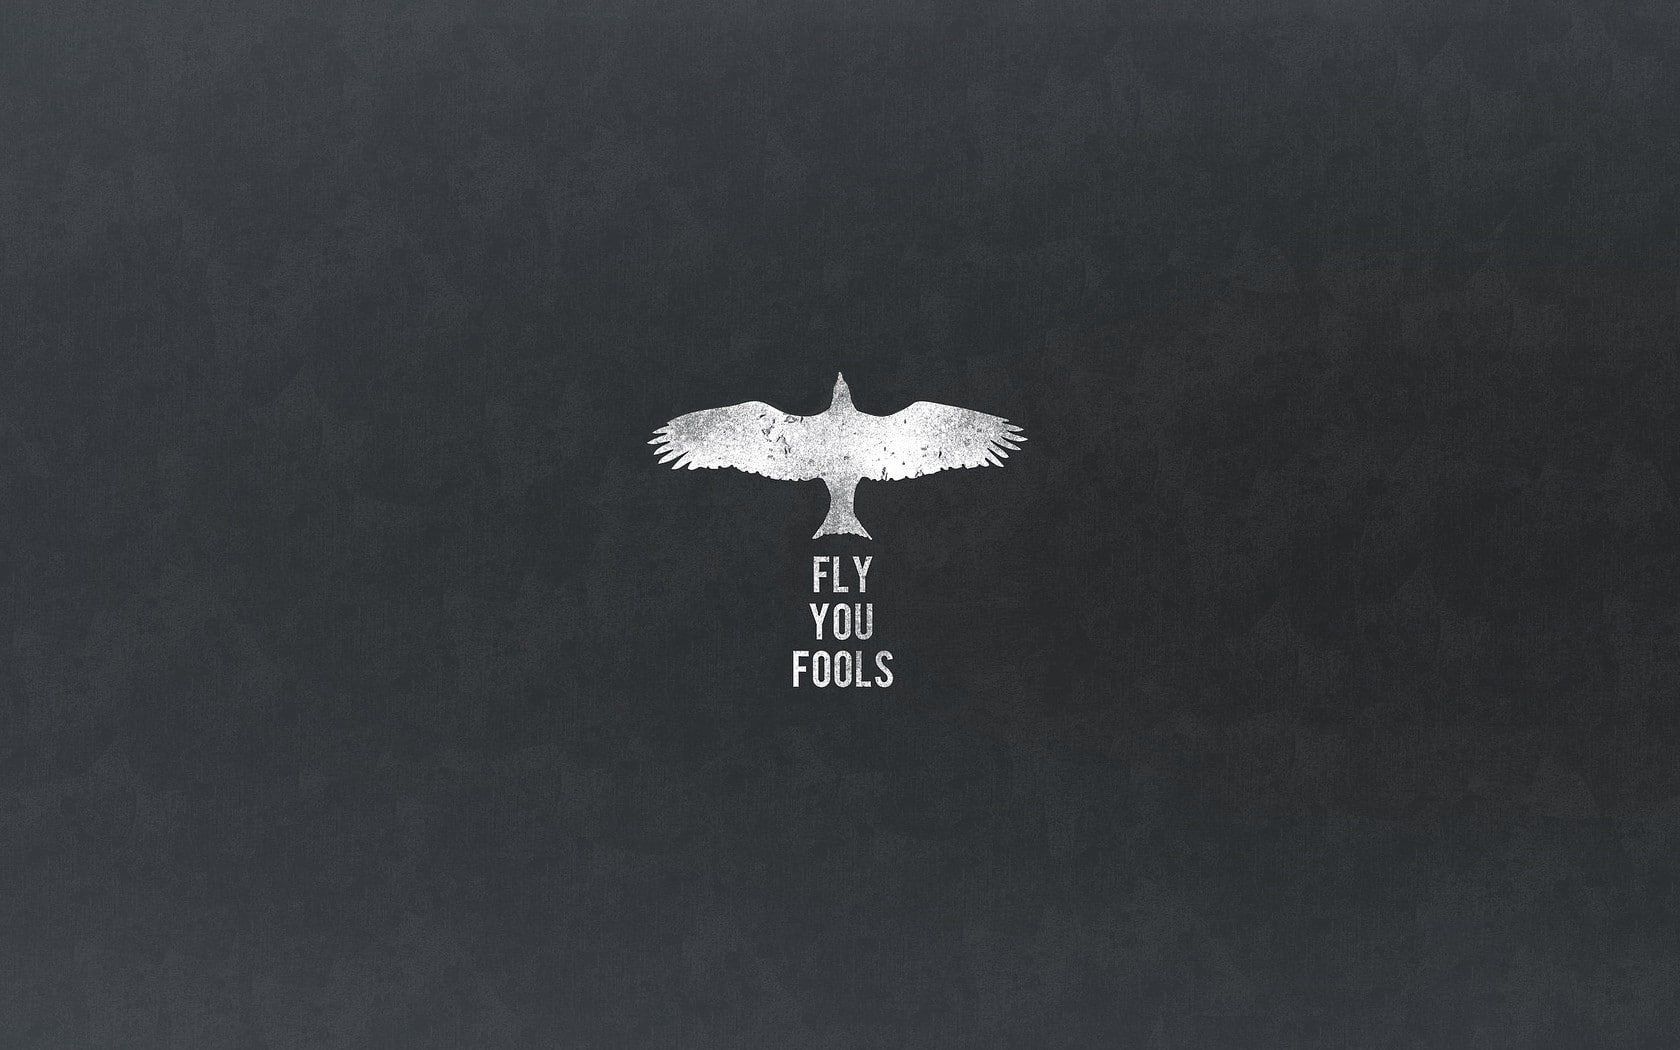 Fly You Fools text #quote The Lord of the Rings #Gandalf